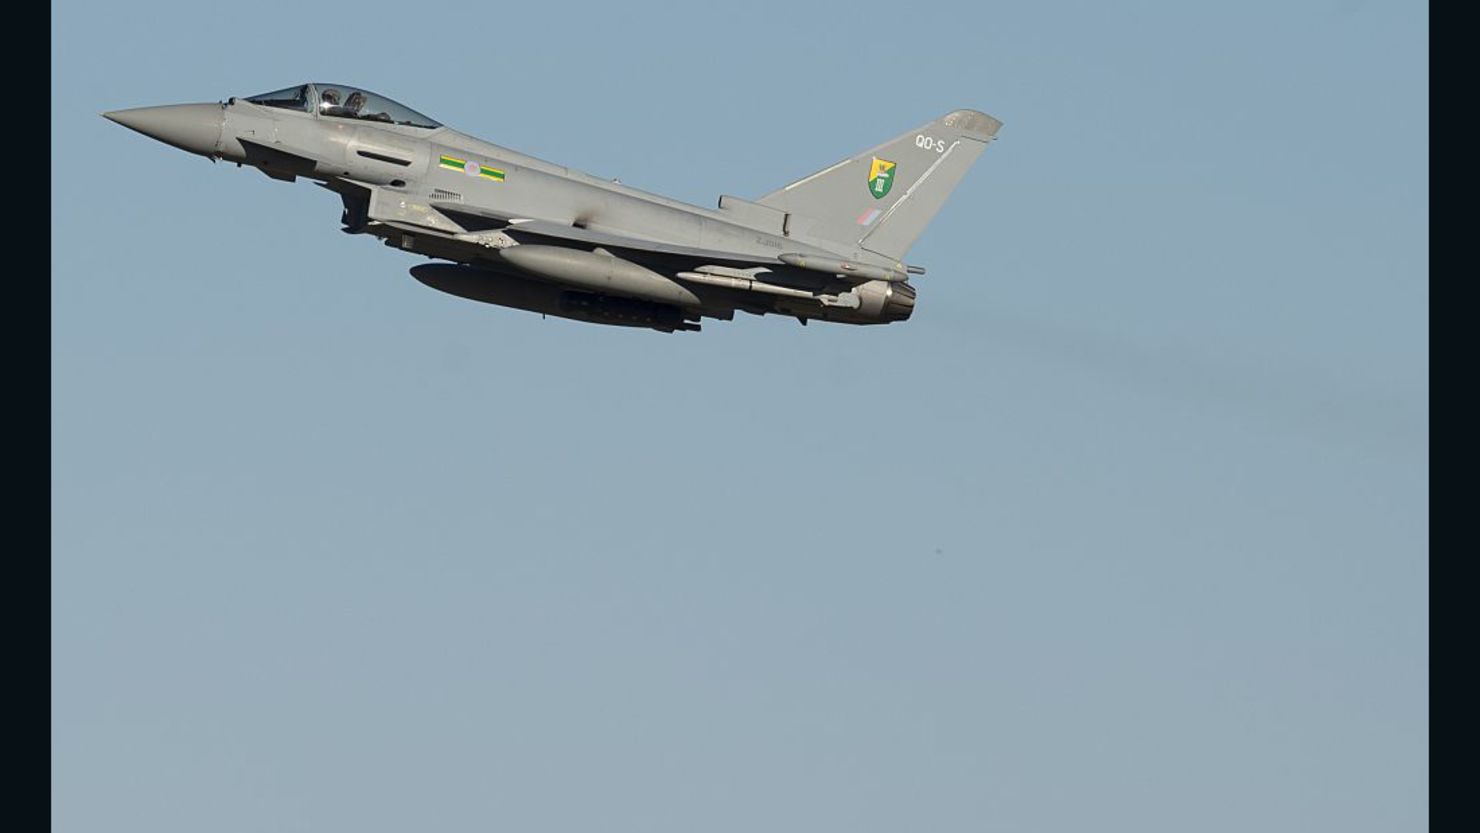 RAF Typhoon fighters escorted the jets away from UK airspace.